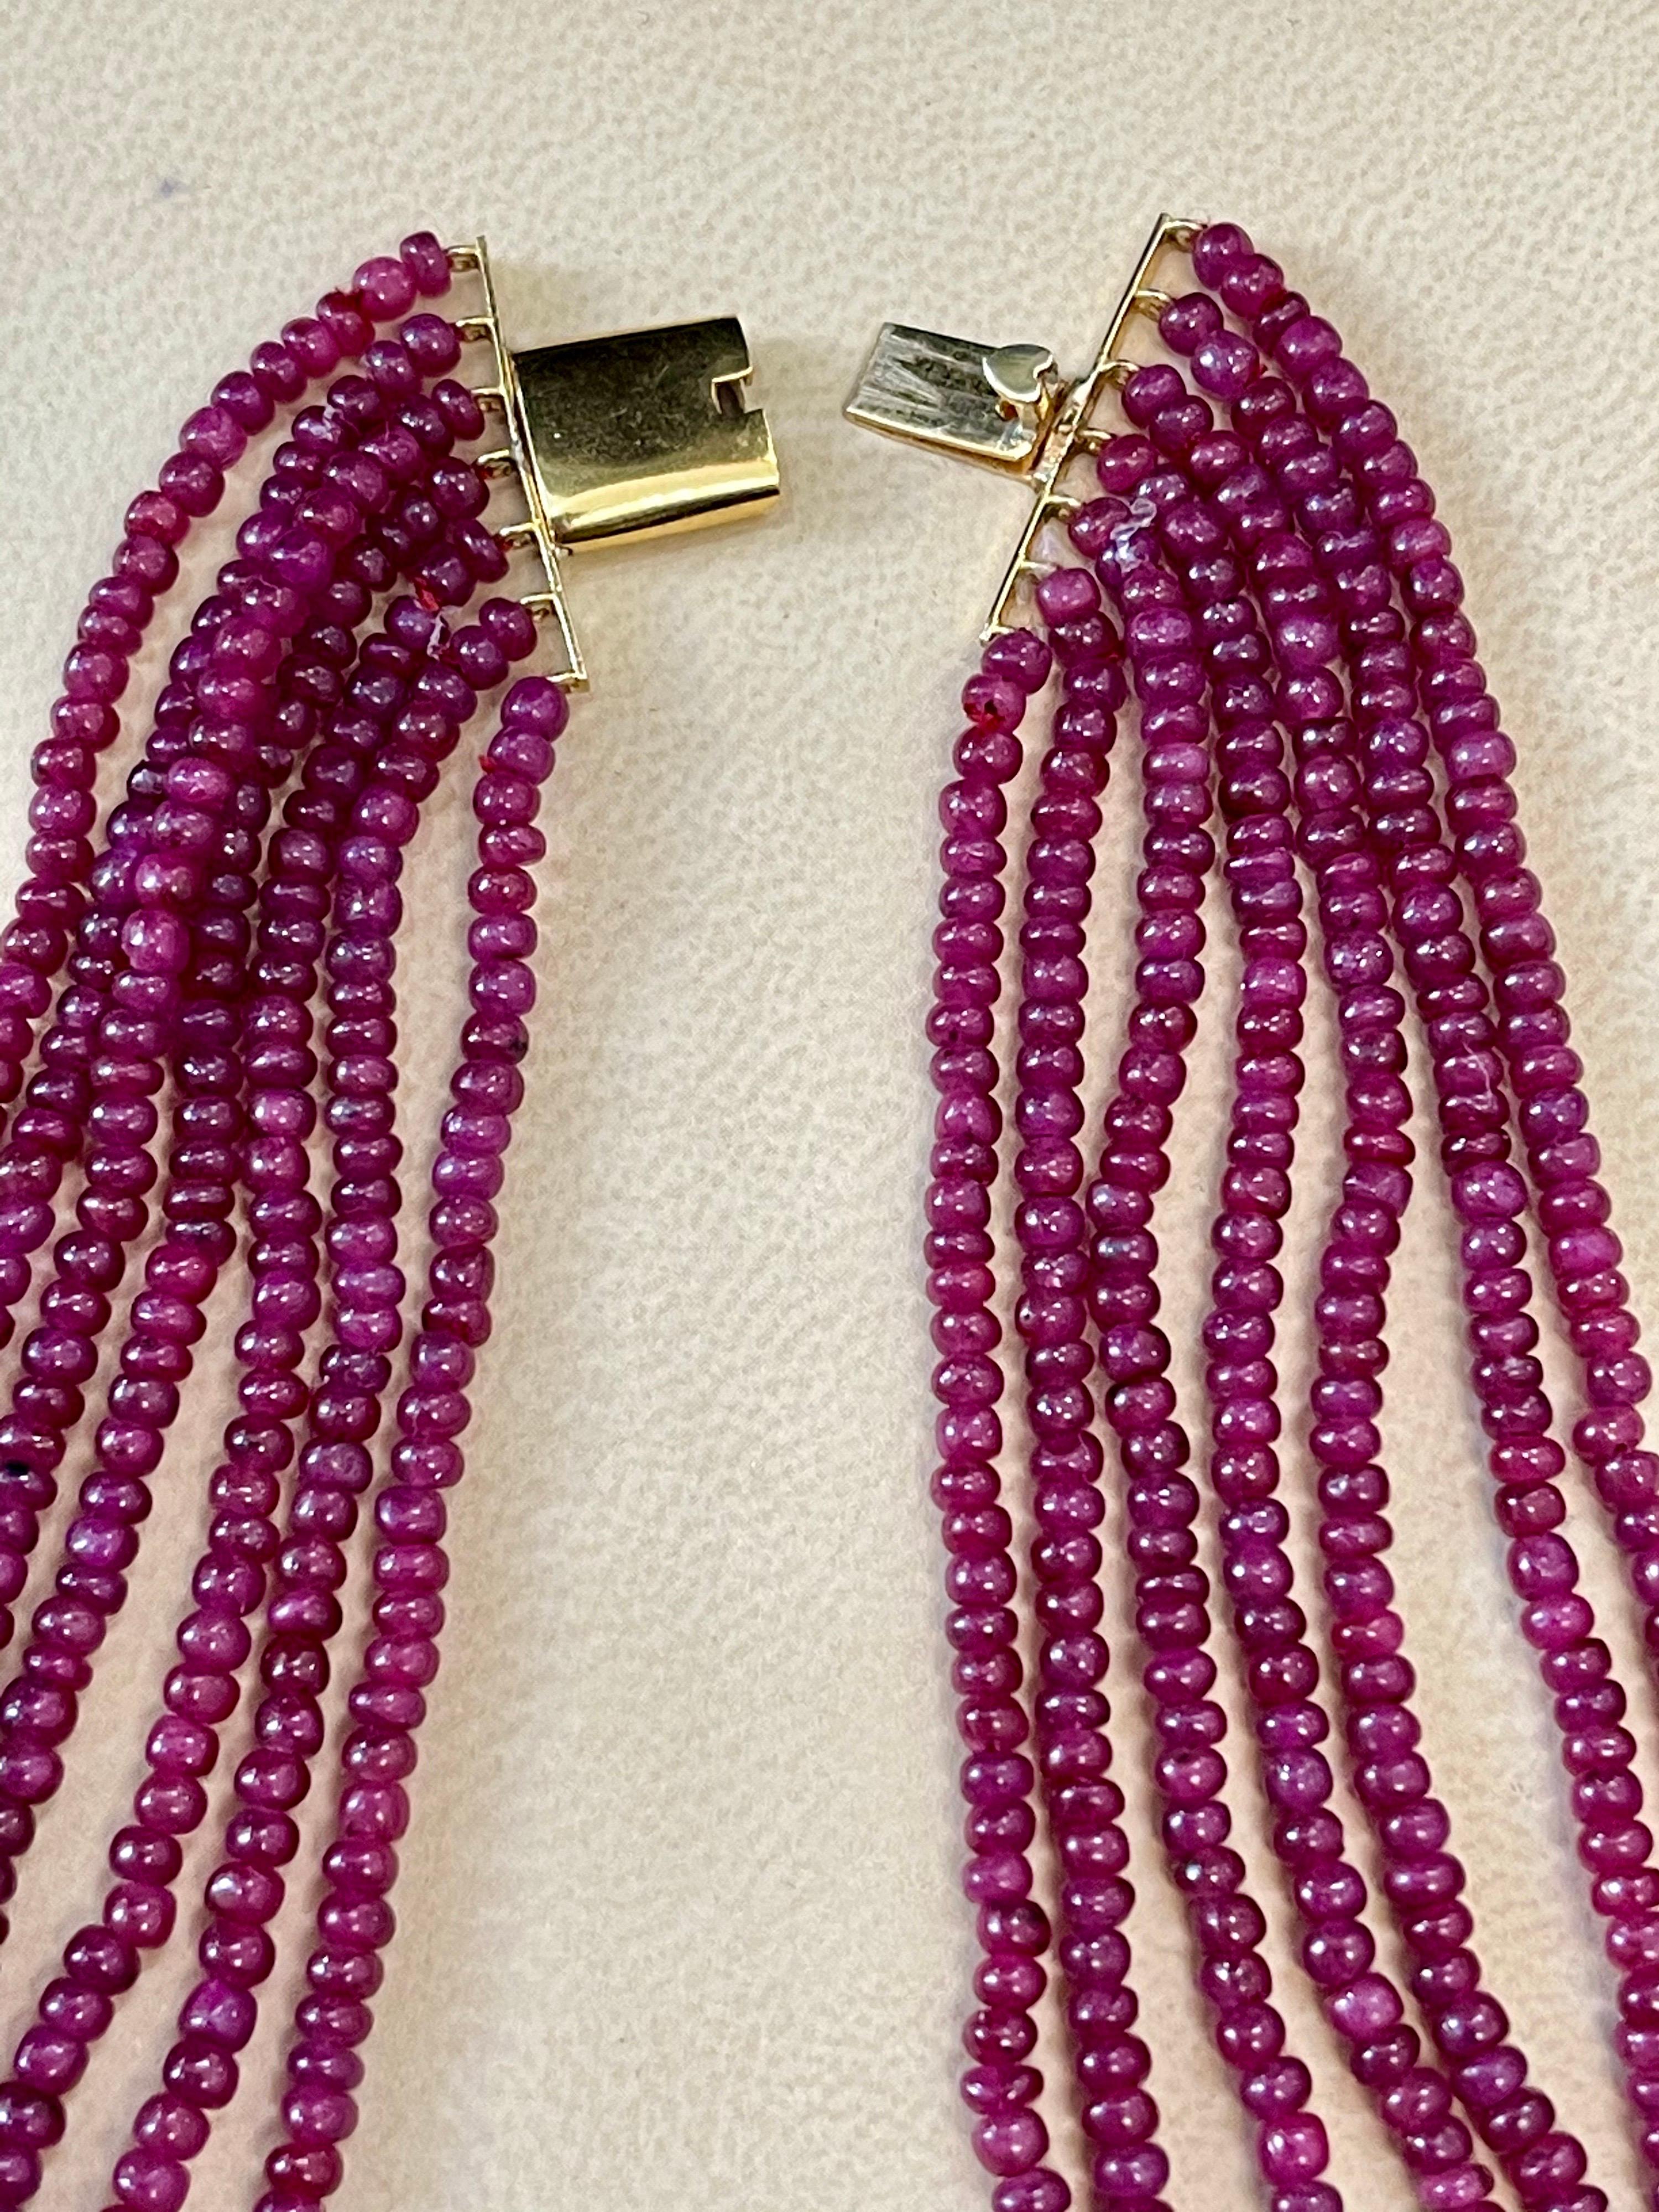 480 Ct 7 Layer Natural Smooth Ruby Bead Necklace 14k Gold Sapphire Diamond Clasp In Excellent Condition For Sale In New York, NY